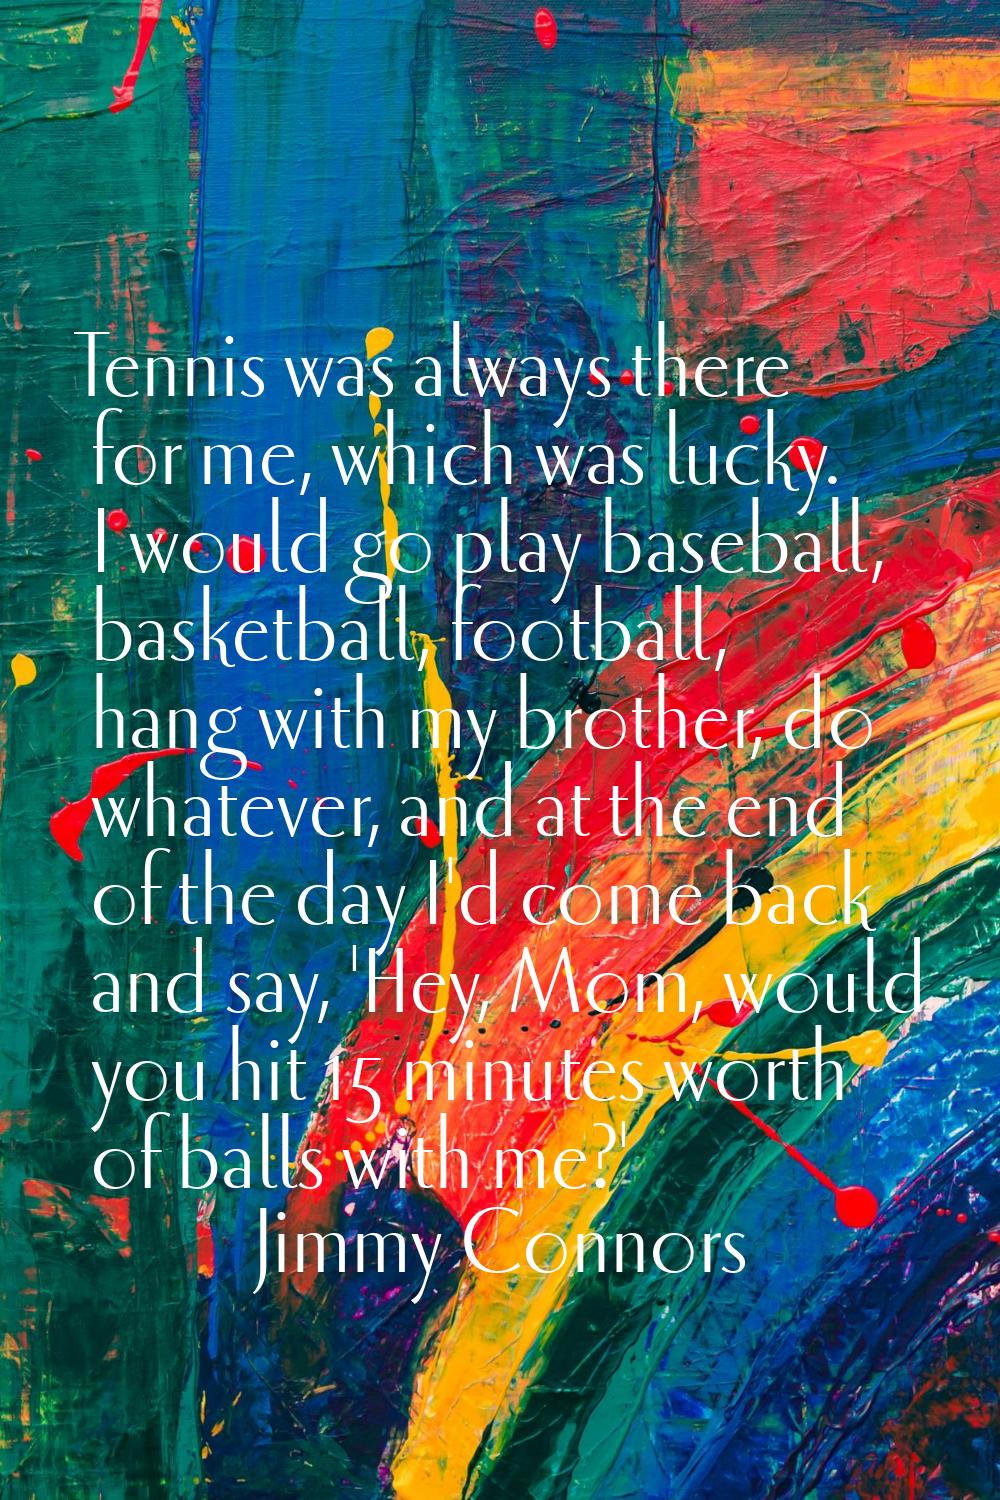 Tennis was always there for me, which was lucky. I would go play baseball, basketball, football, ha